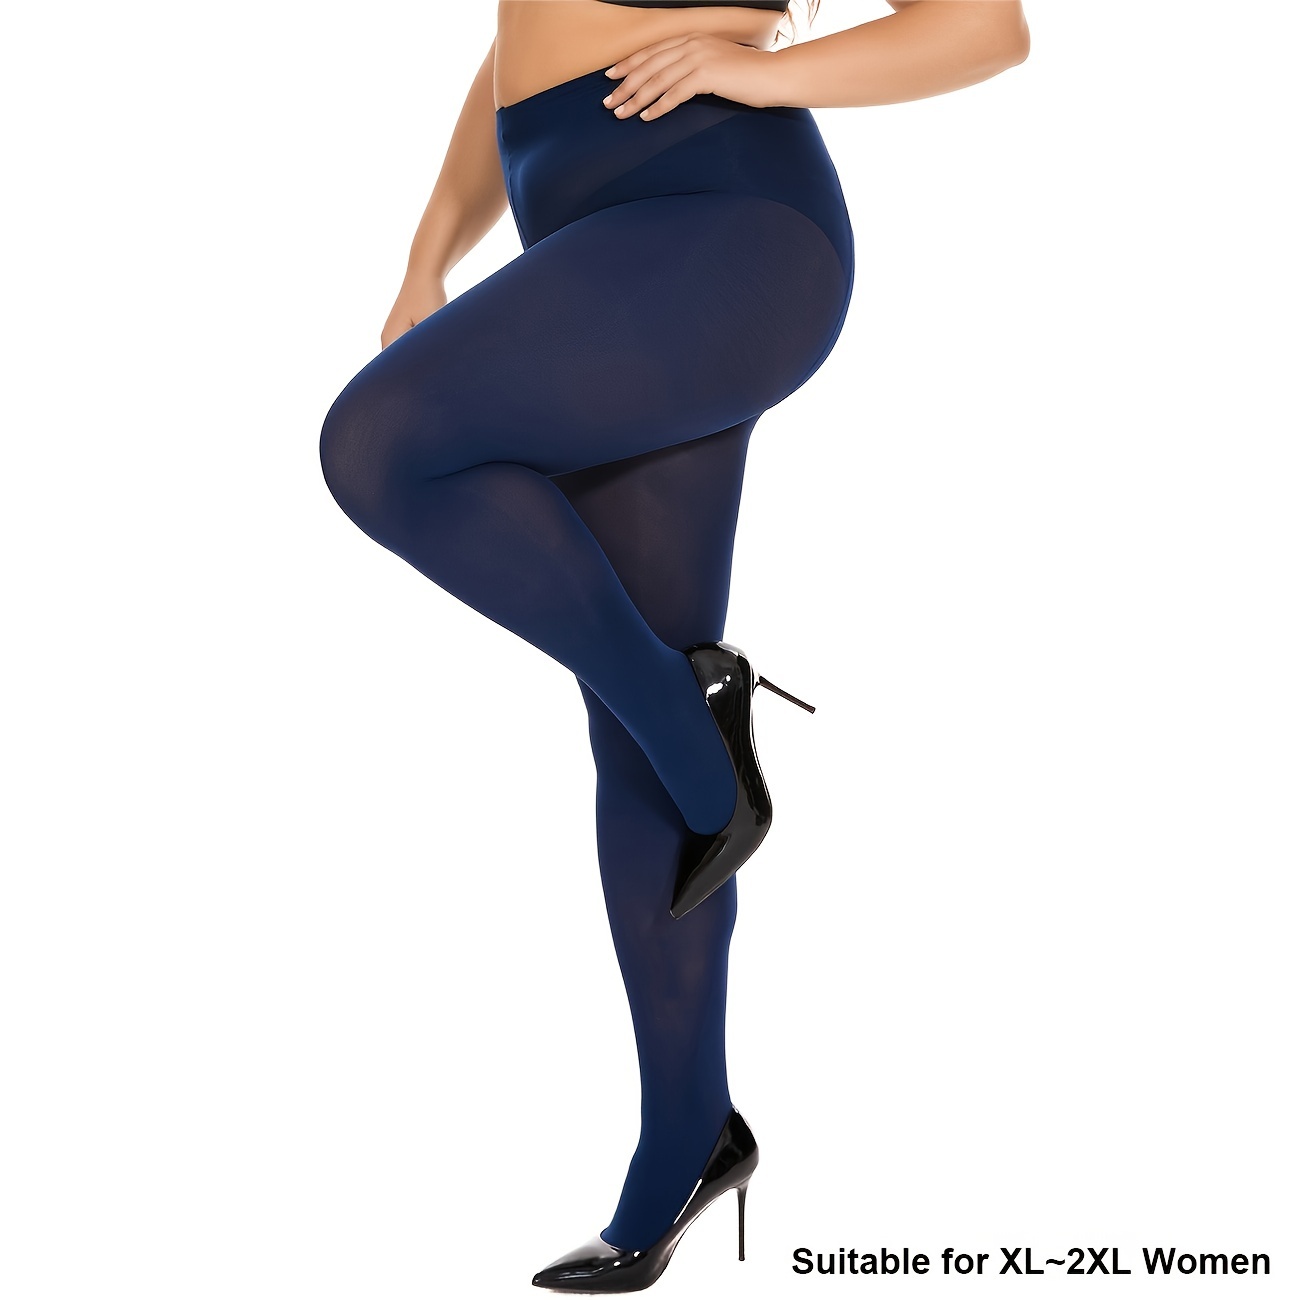 Navy Blue Opaque Tights Pantyhose Queen Size Lingerie L/xl for